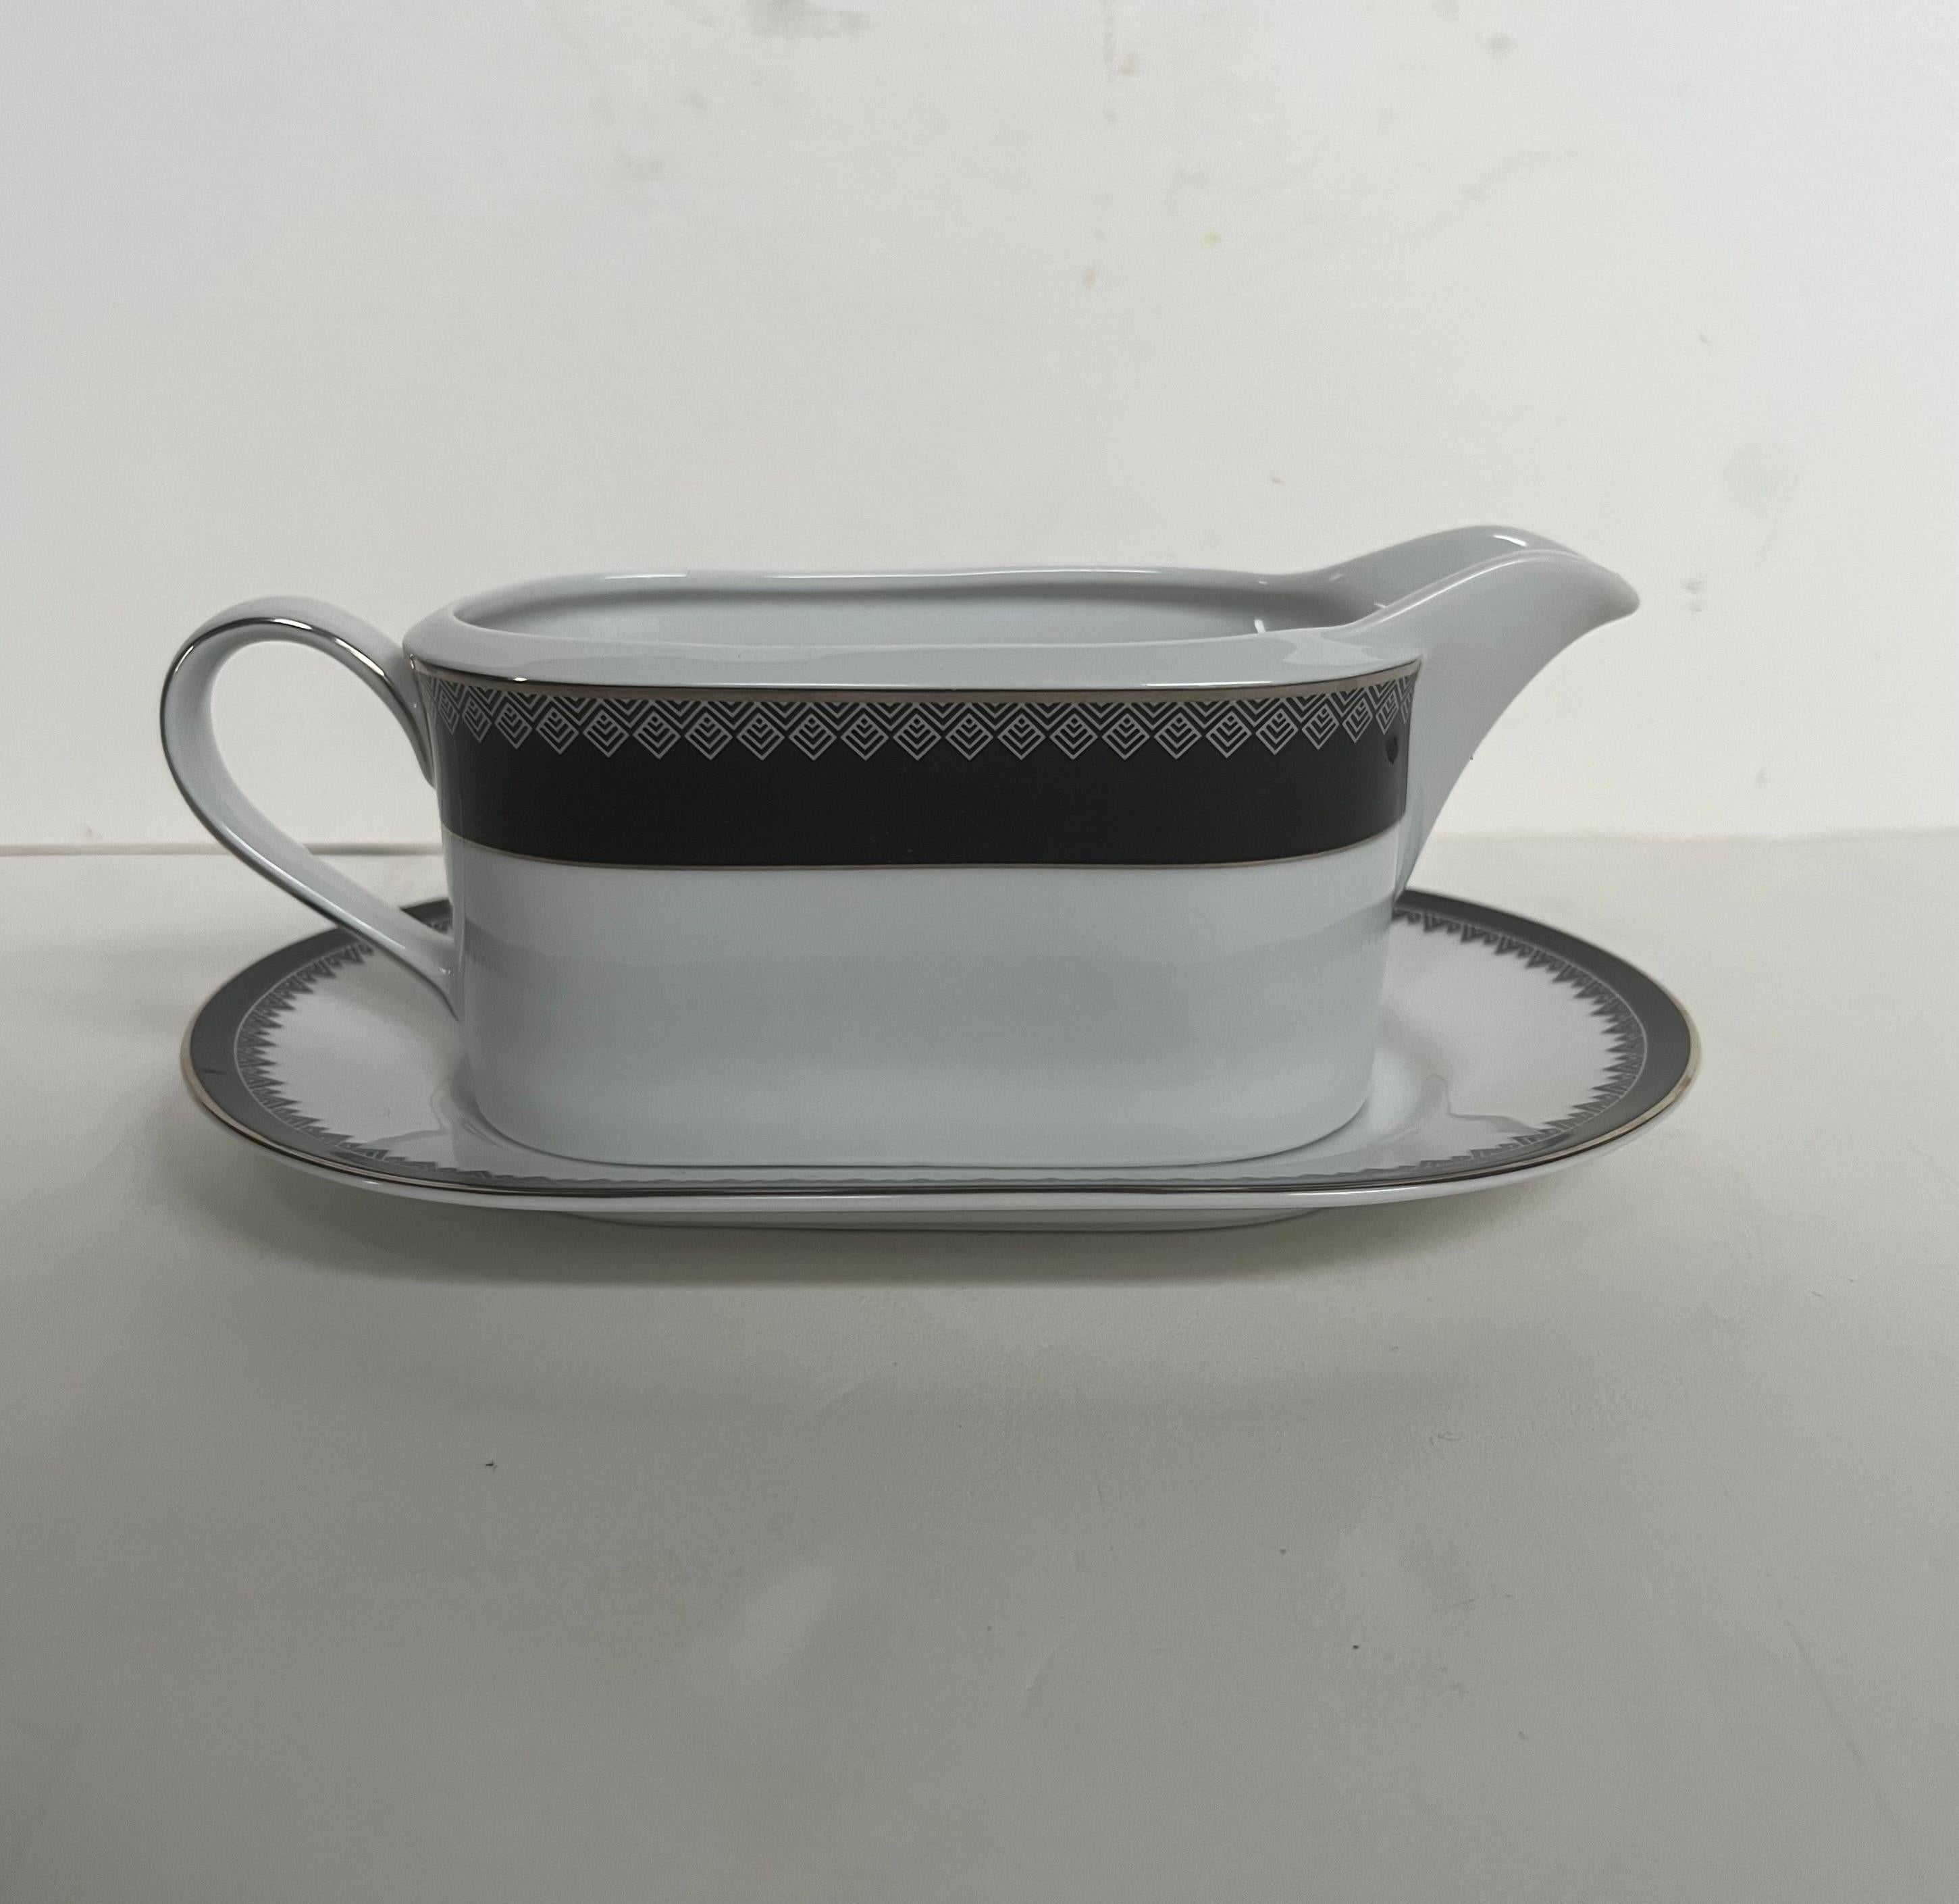 Lauren by Ralph Lauren bone china gravy boat and separate underplate in the Hastings Ebony pattern.

Signed.

Dimensions: 8-1/8” L x 5-1/4” D x 3-1/4” H.